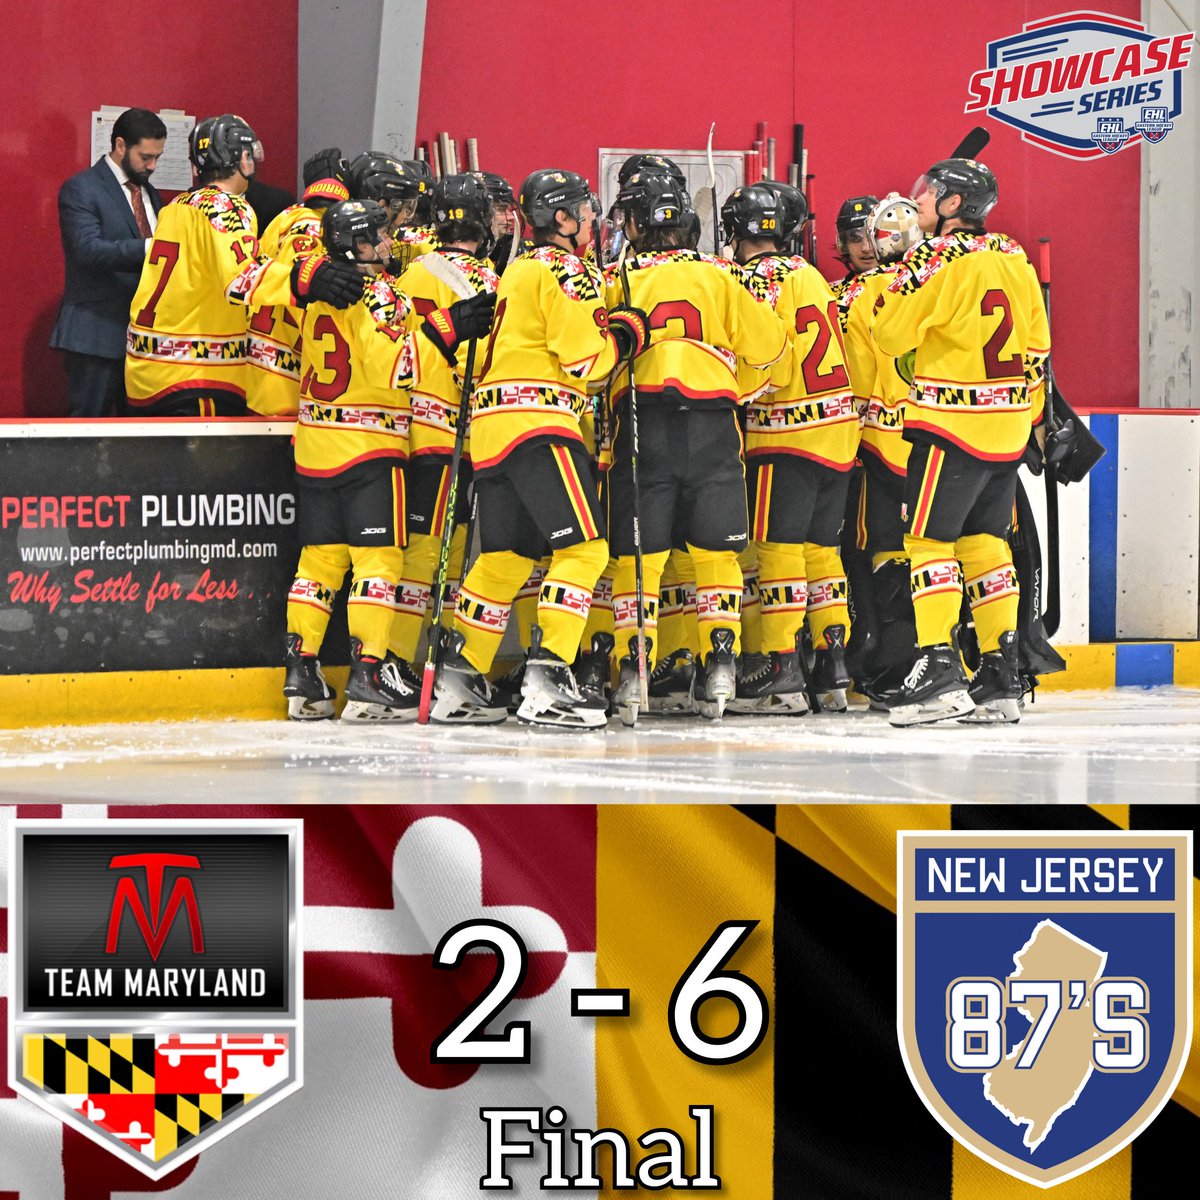 Not our best showing this afternoon. We're back at it on Monday afternoon on the road against Philadelphia Hockey Club.

#MarylandPride #EHL #ShowcaseSeries